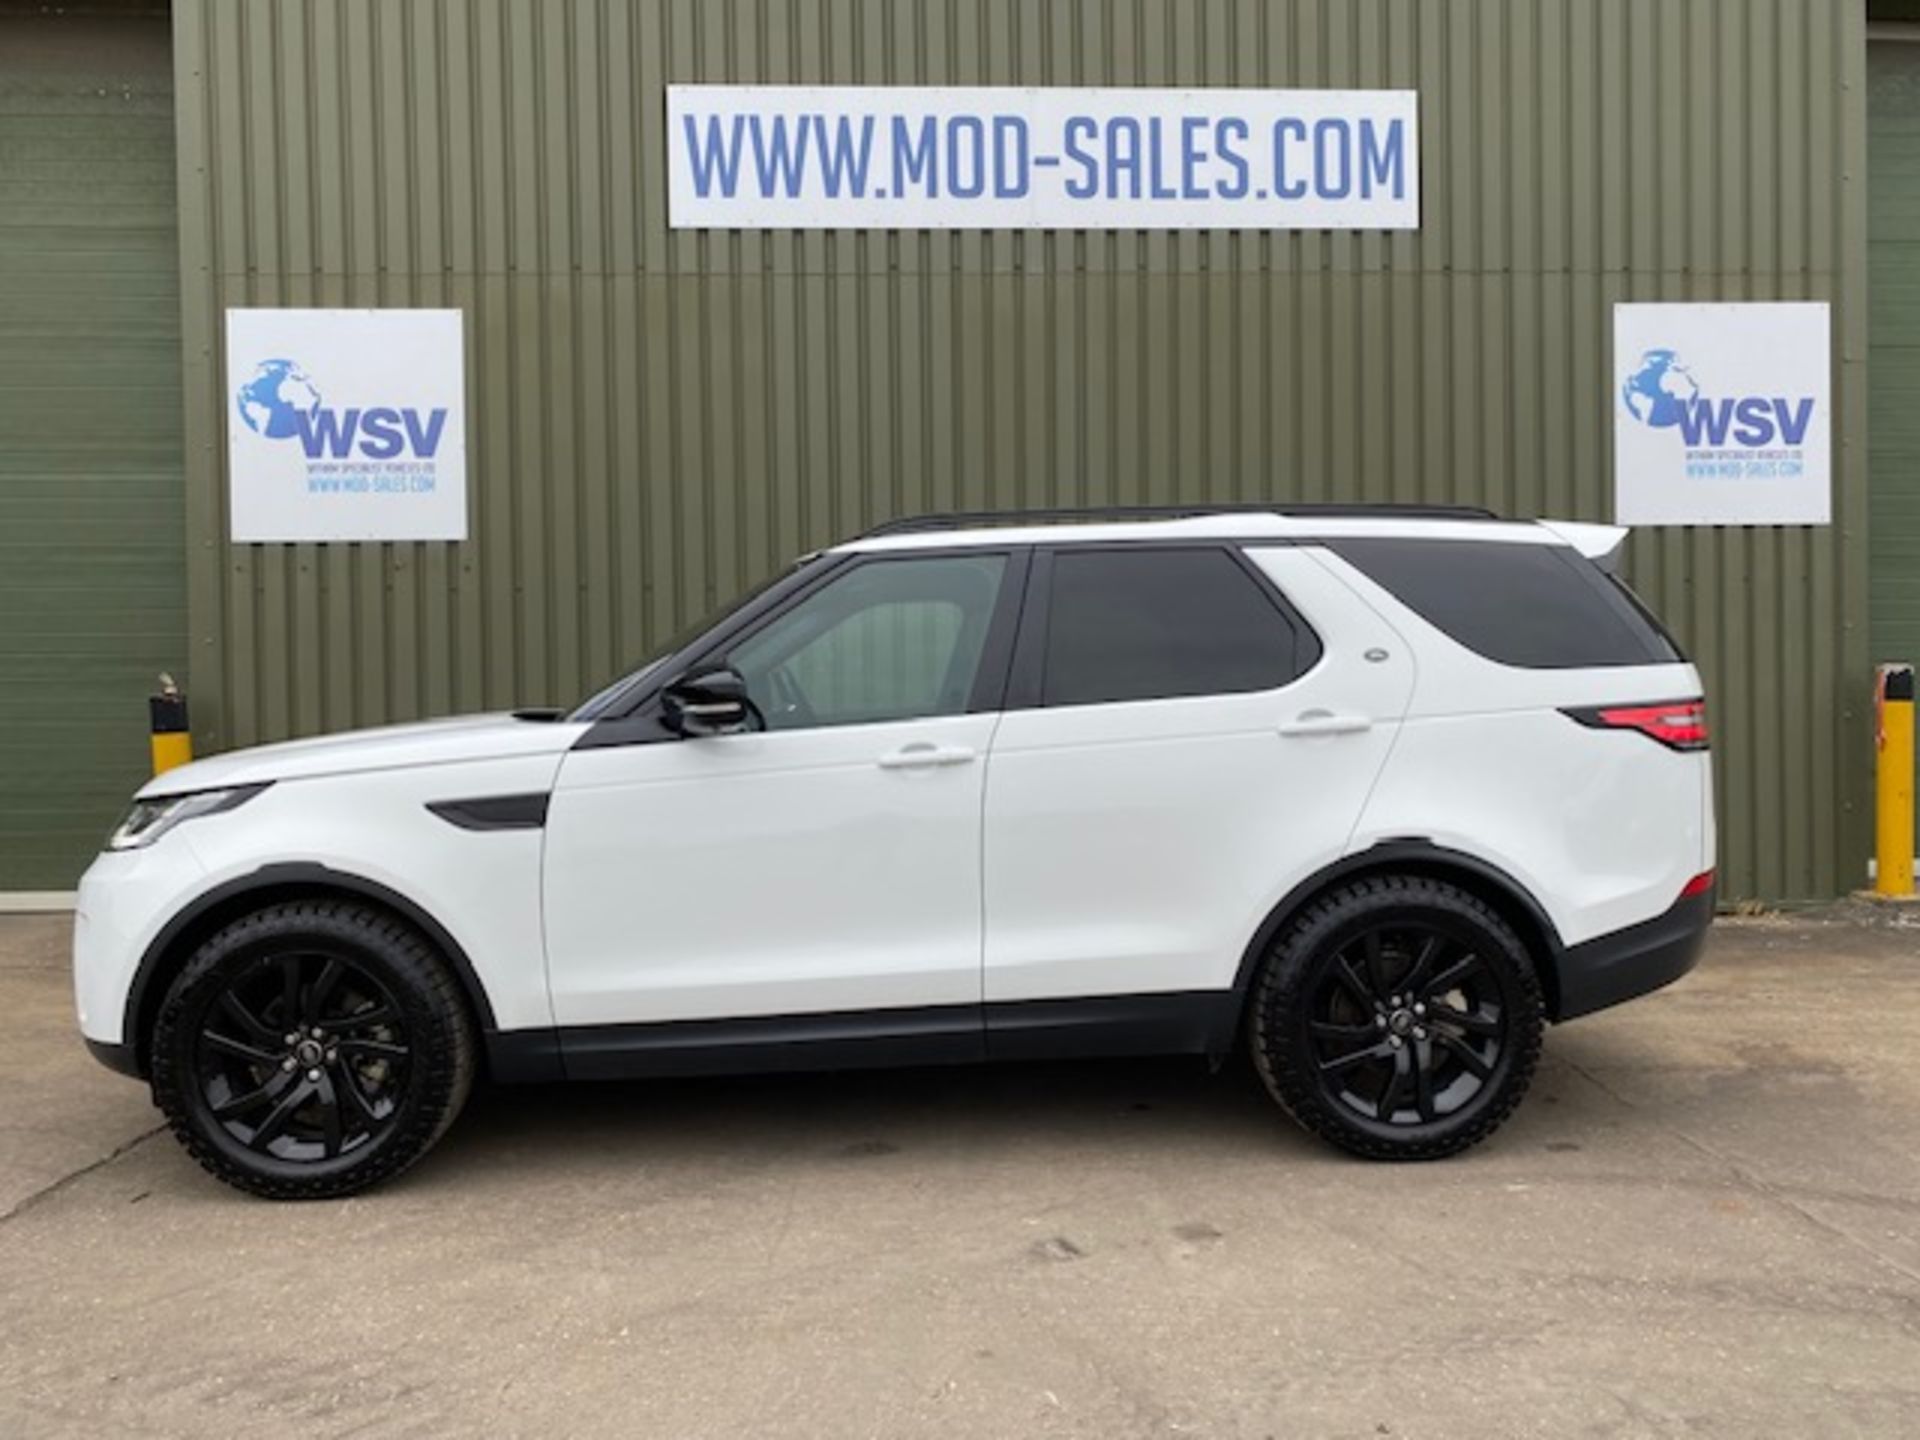 2019 model year Land Rover Discovery 5 3.0 TDV6 HSE Luxury RHD ONLY 5778 MILES! - Bild 4 aus 21